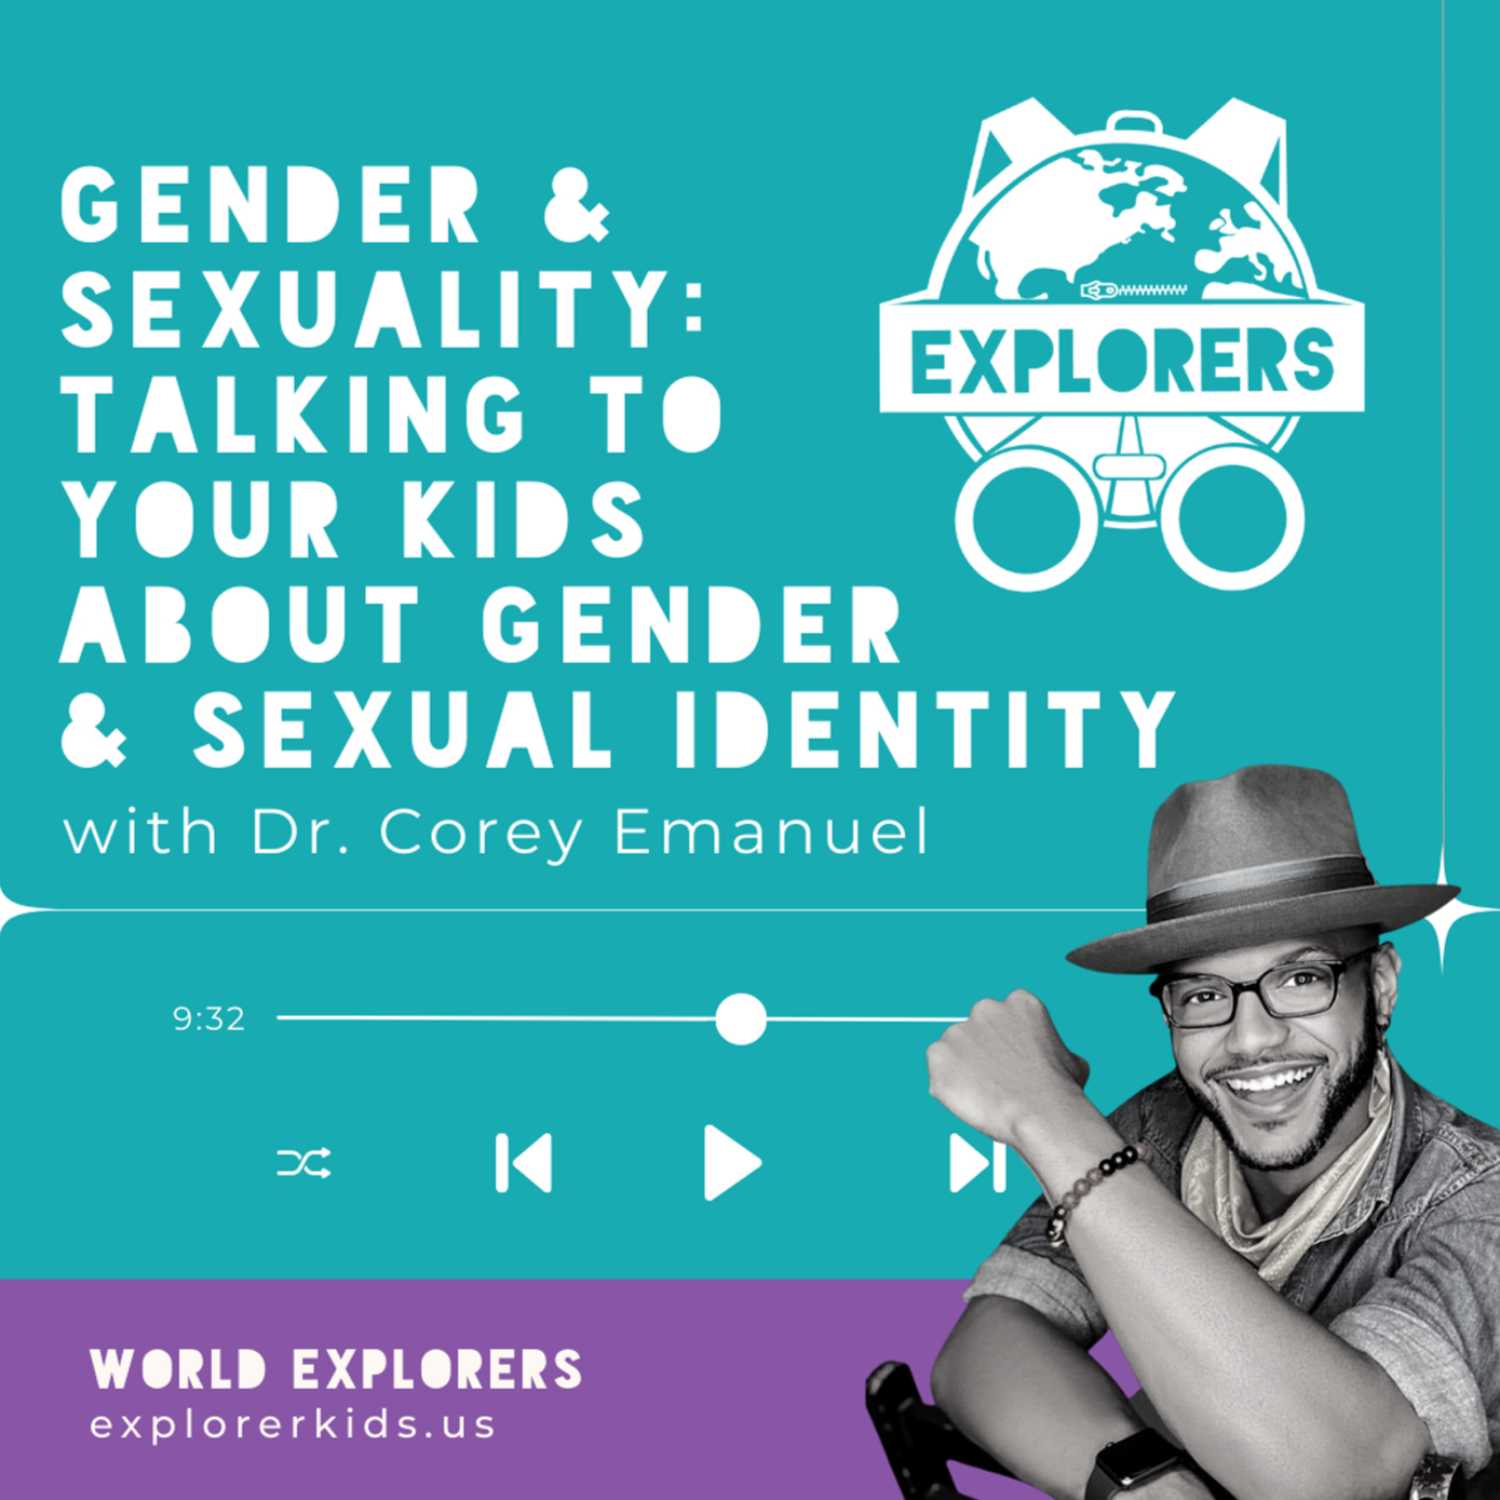 Gender & Sexuality: Talking to Your Kids about Gender & Sexual Identity